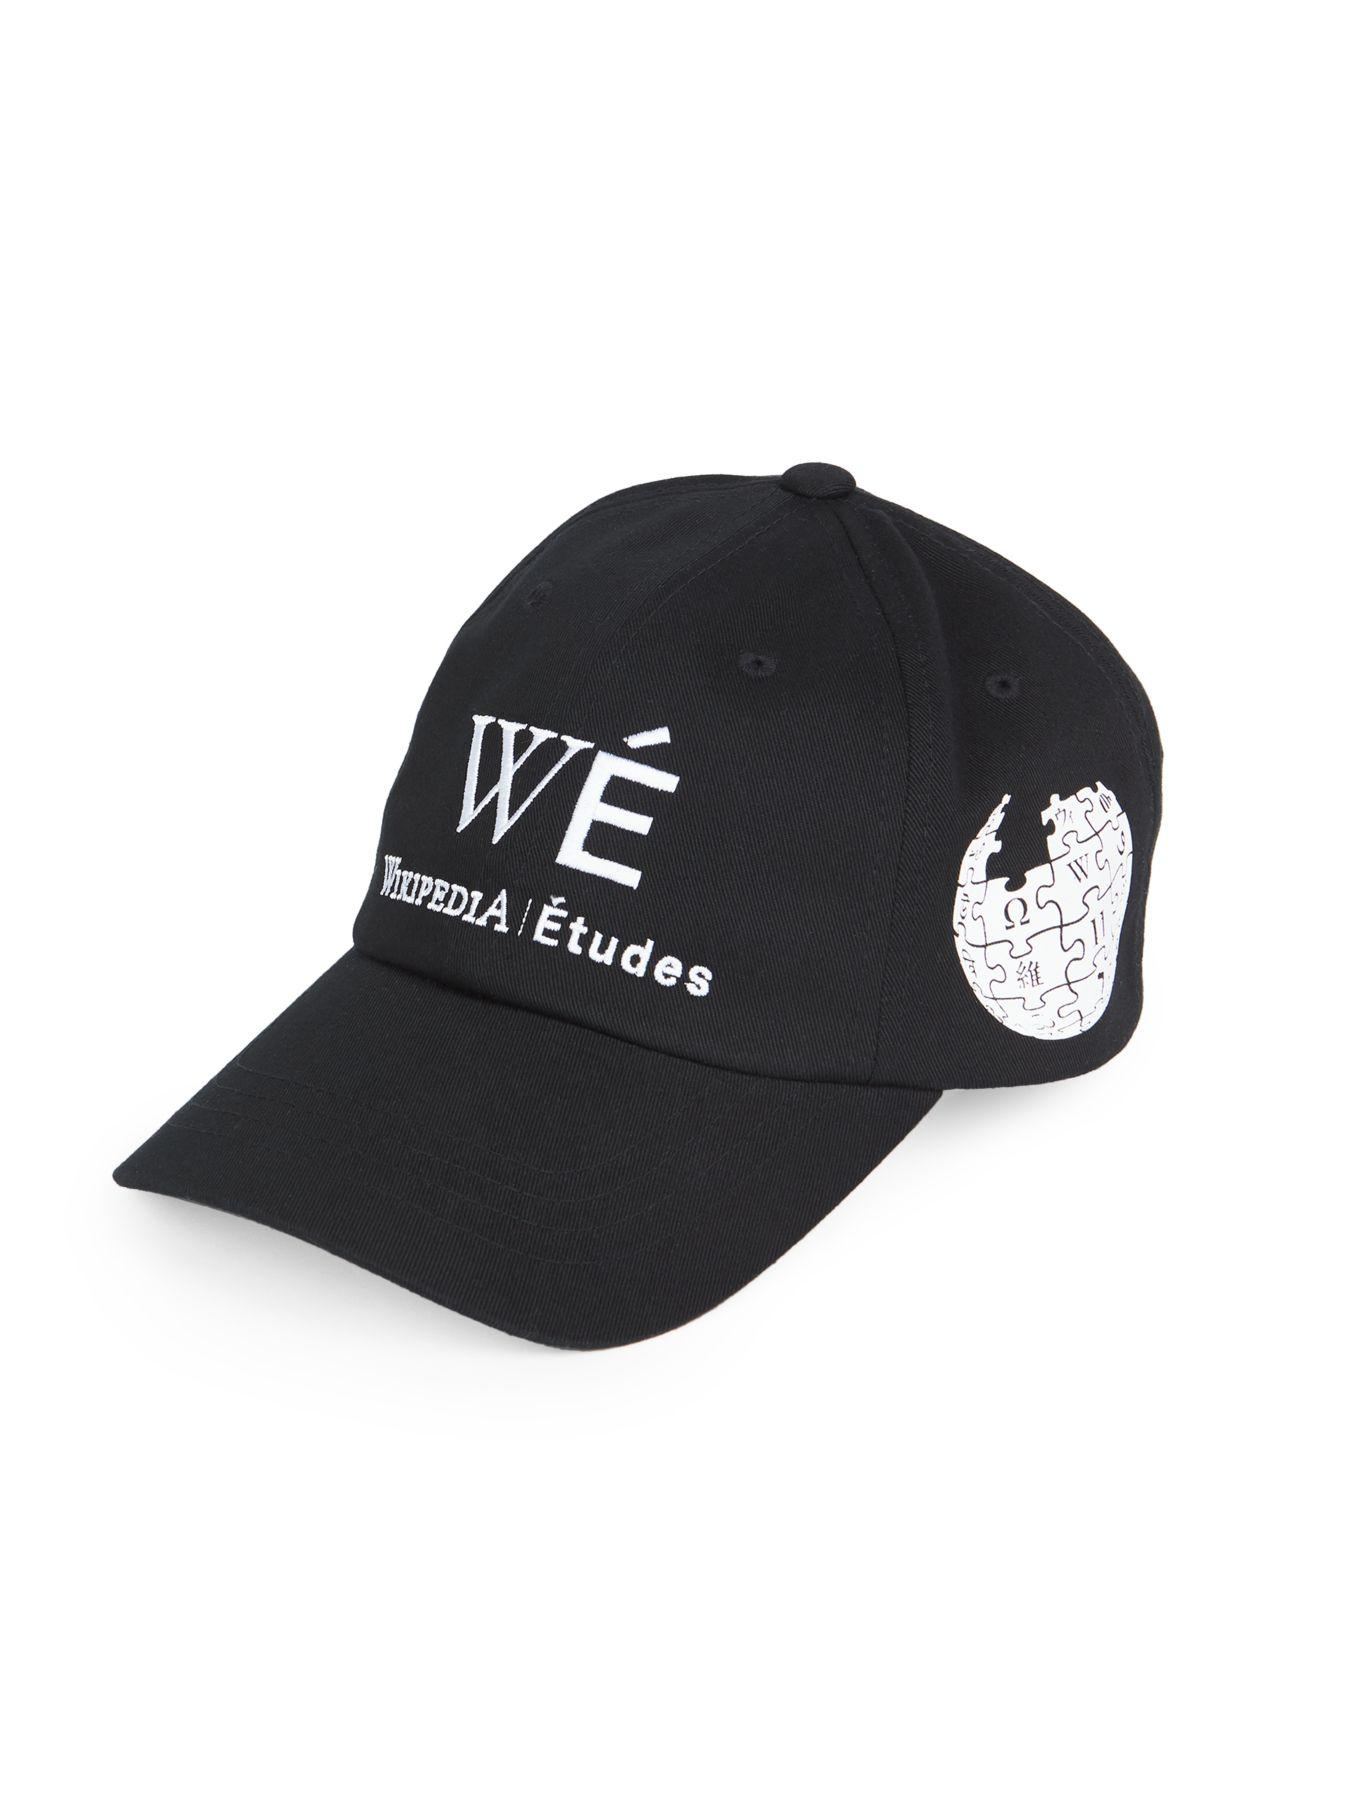 cap wikipedia All products are discounted, Cheaper Than Retail Price, Free  Delivery & Returns OFF 74%